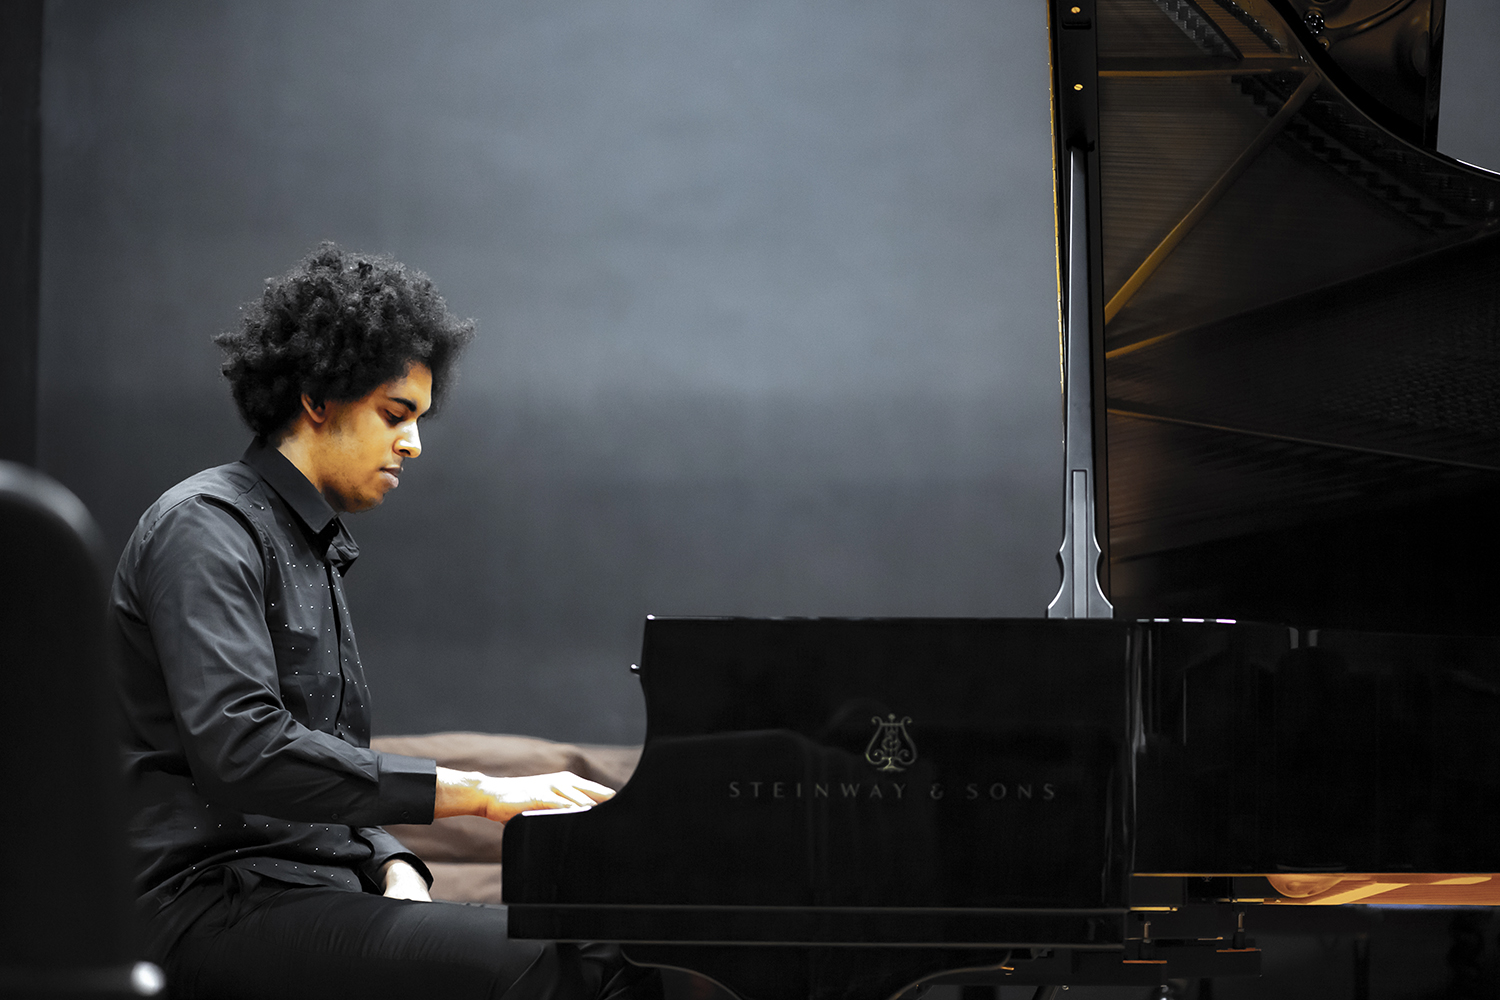 A man wearing black performs on a piano in the Performance Studio